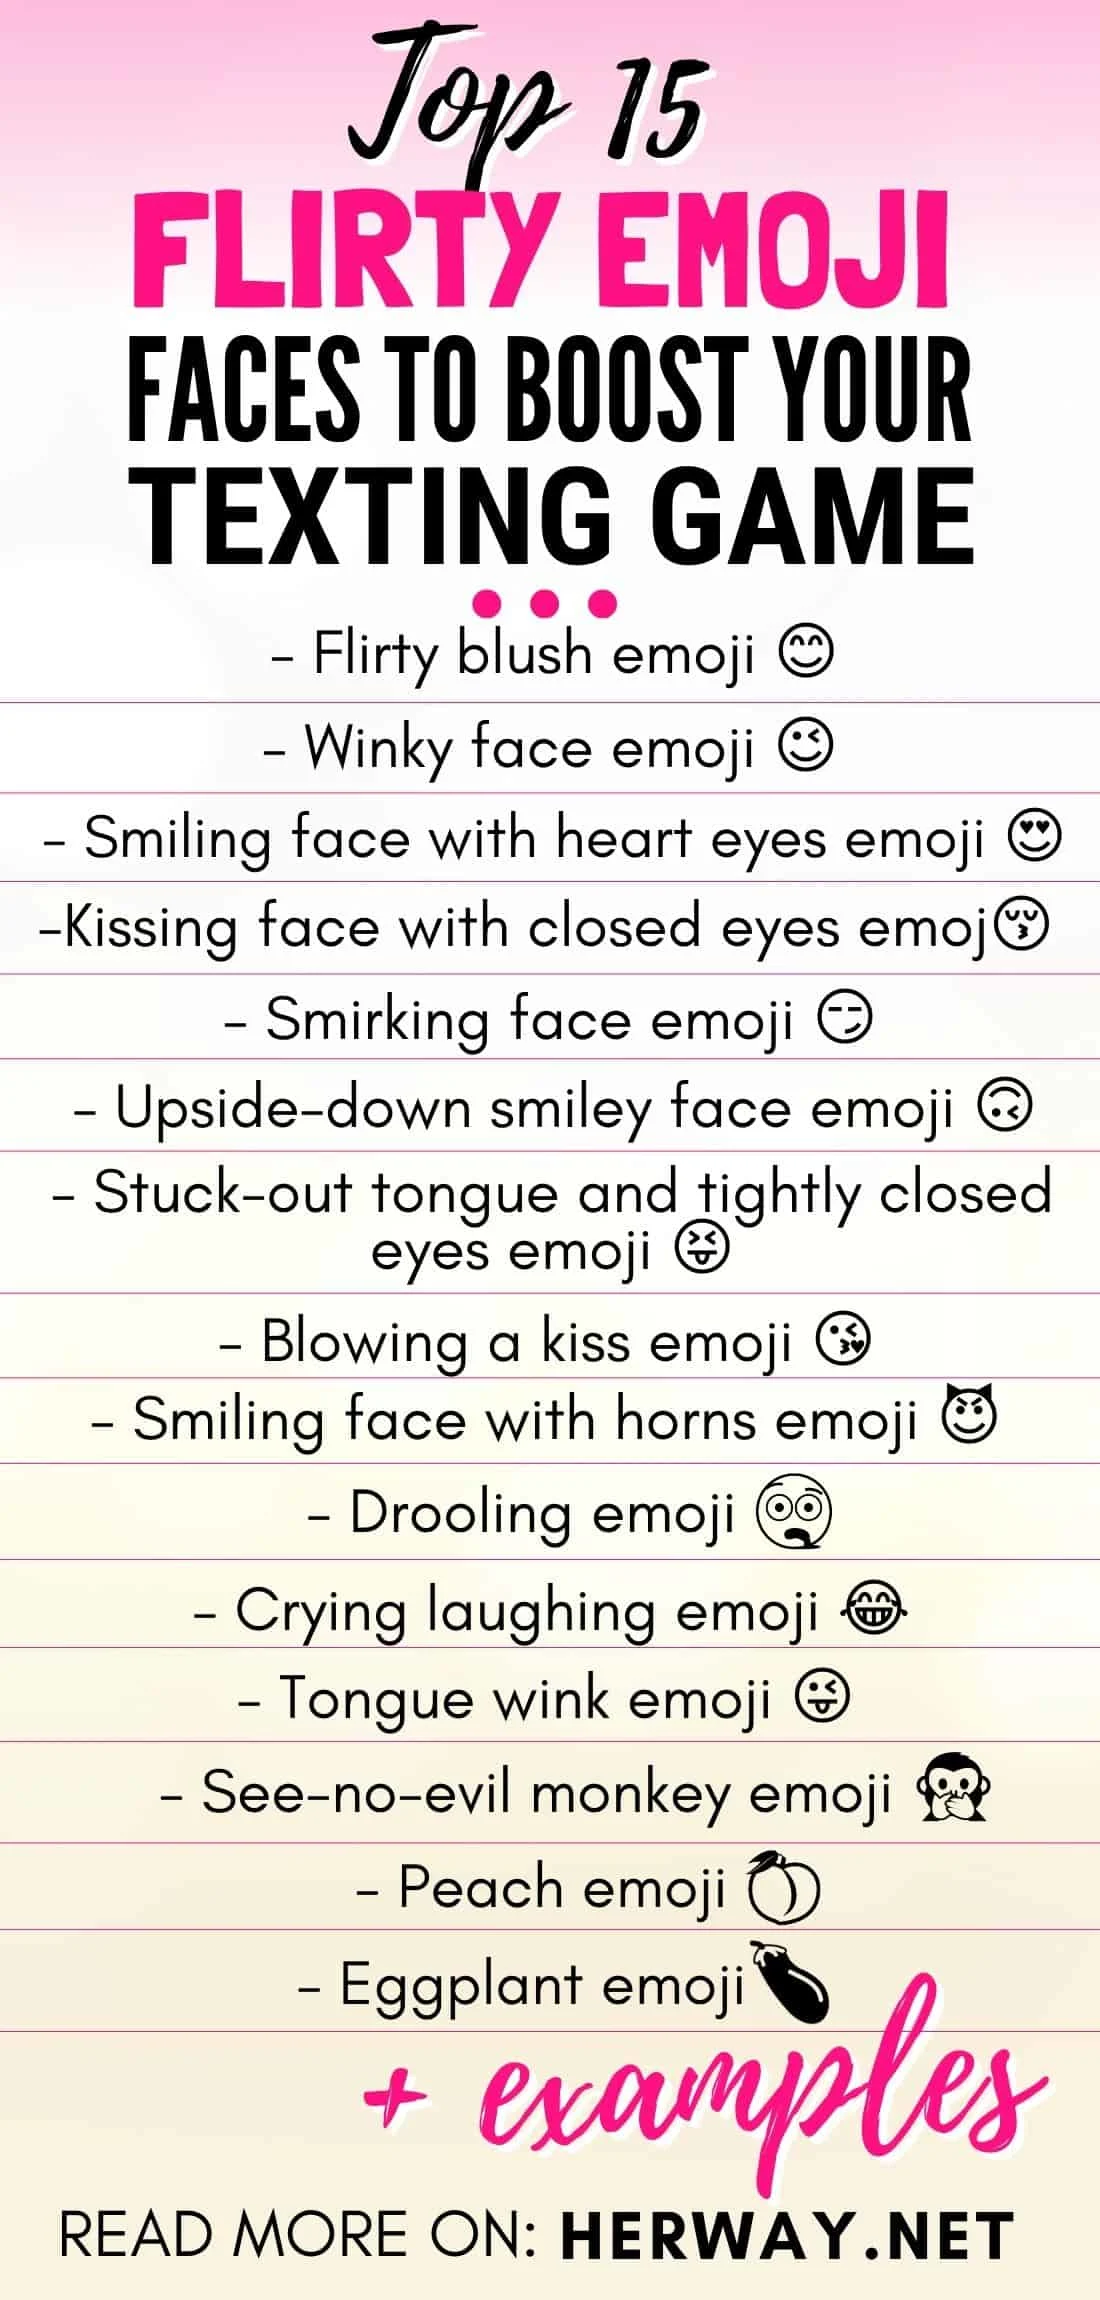 When to use emoticons in case of flirting?